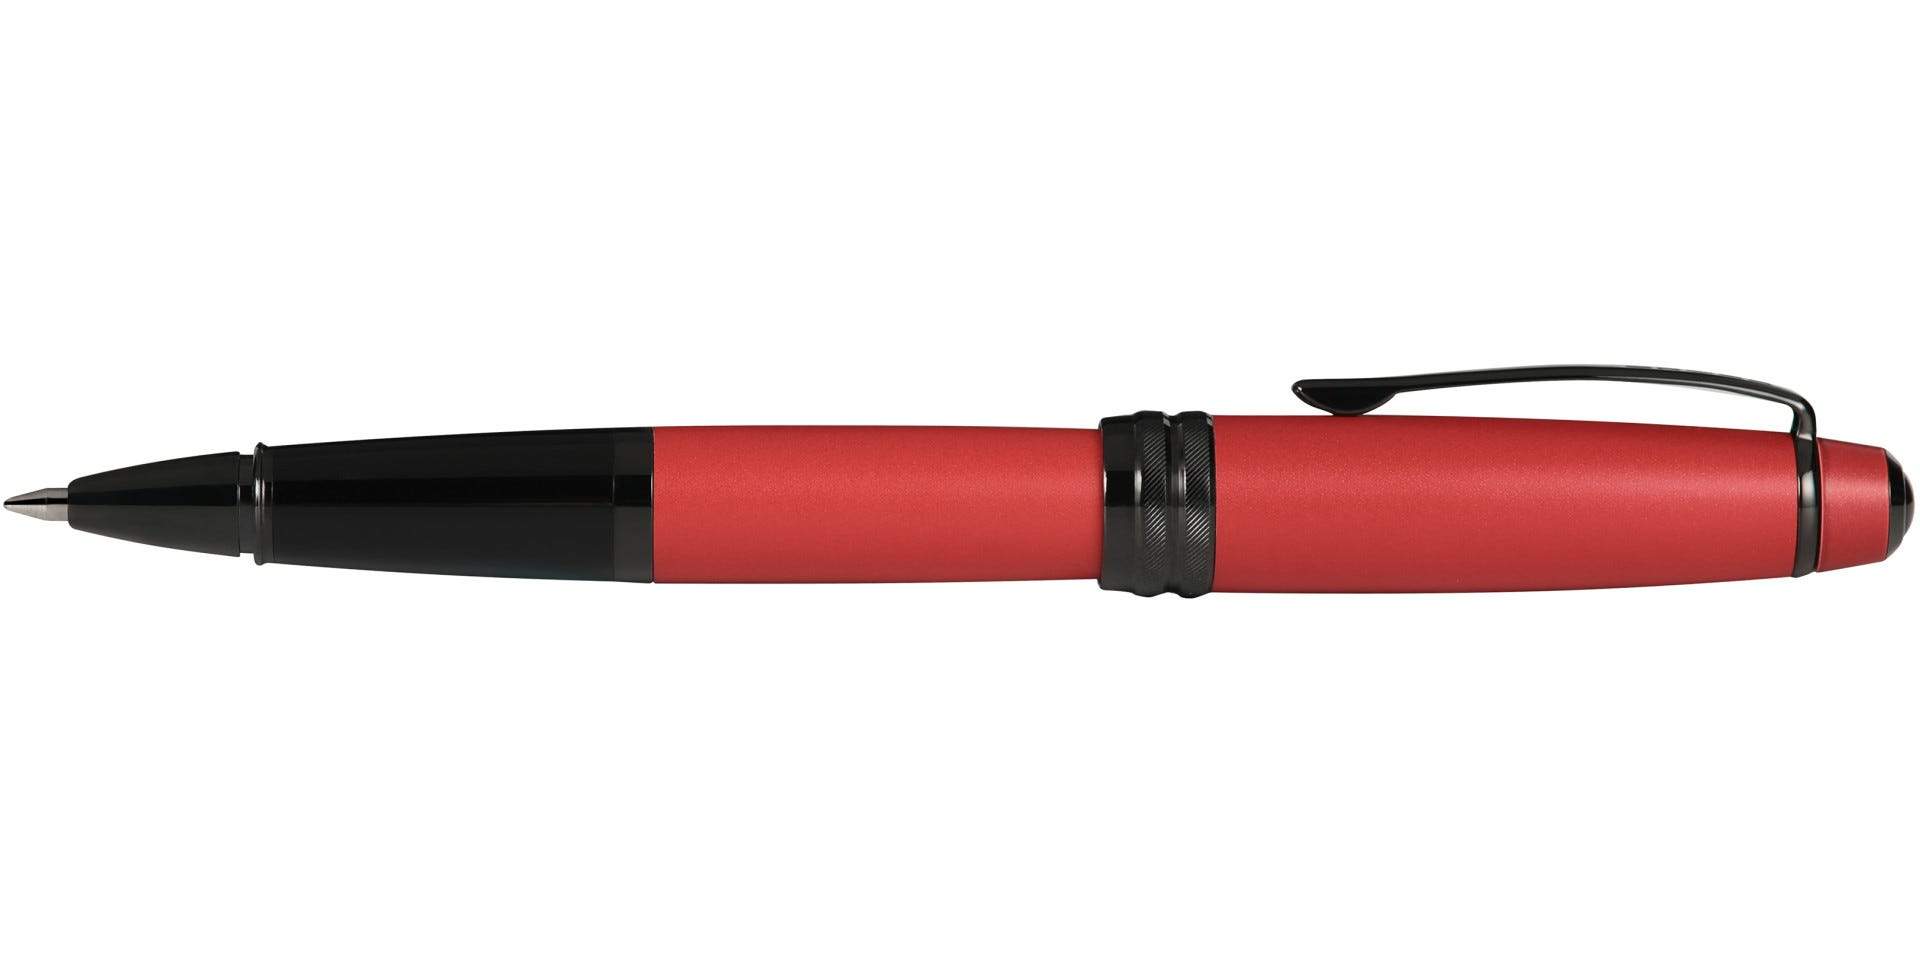 Cross Bailey Matte Red Lacquer Rollerball Pen - AT0455-21